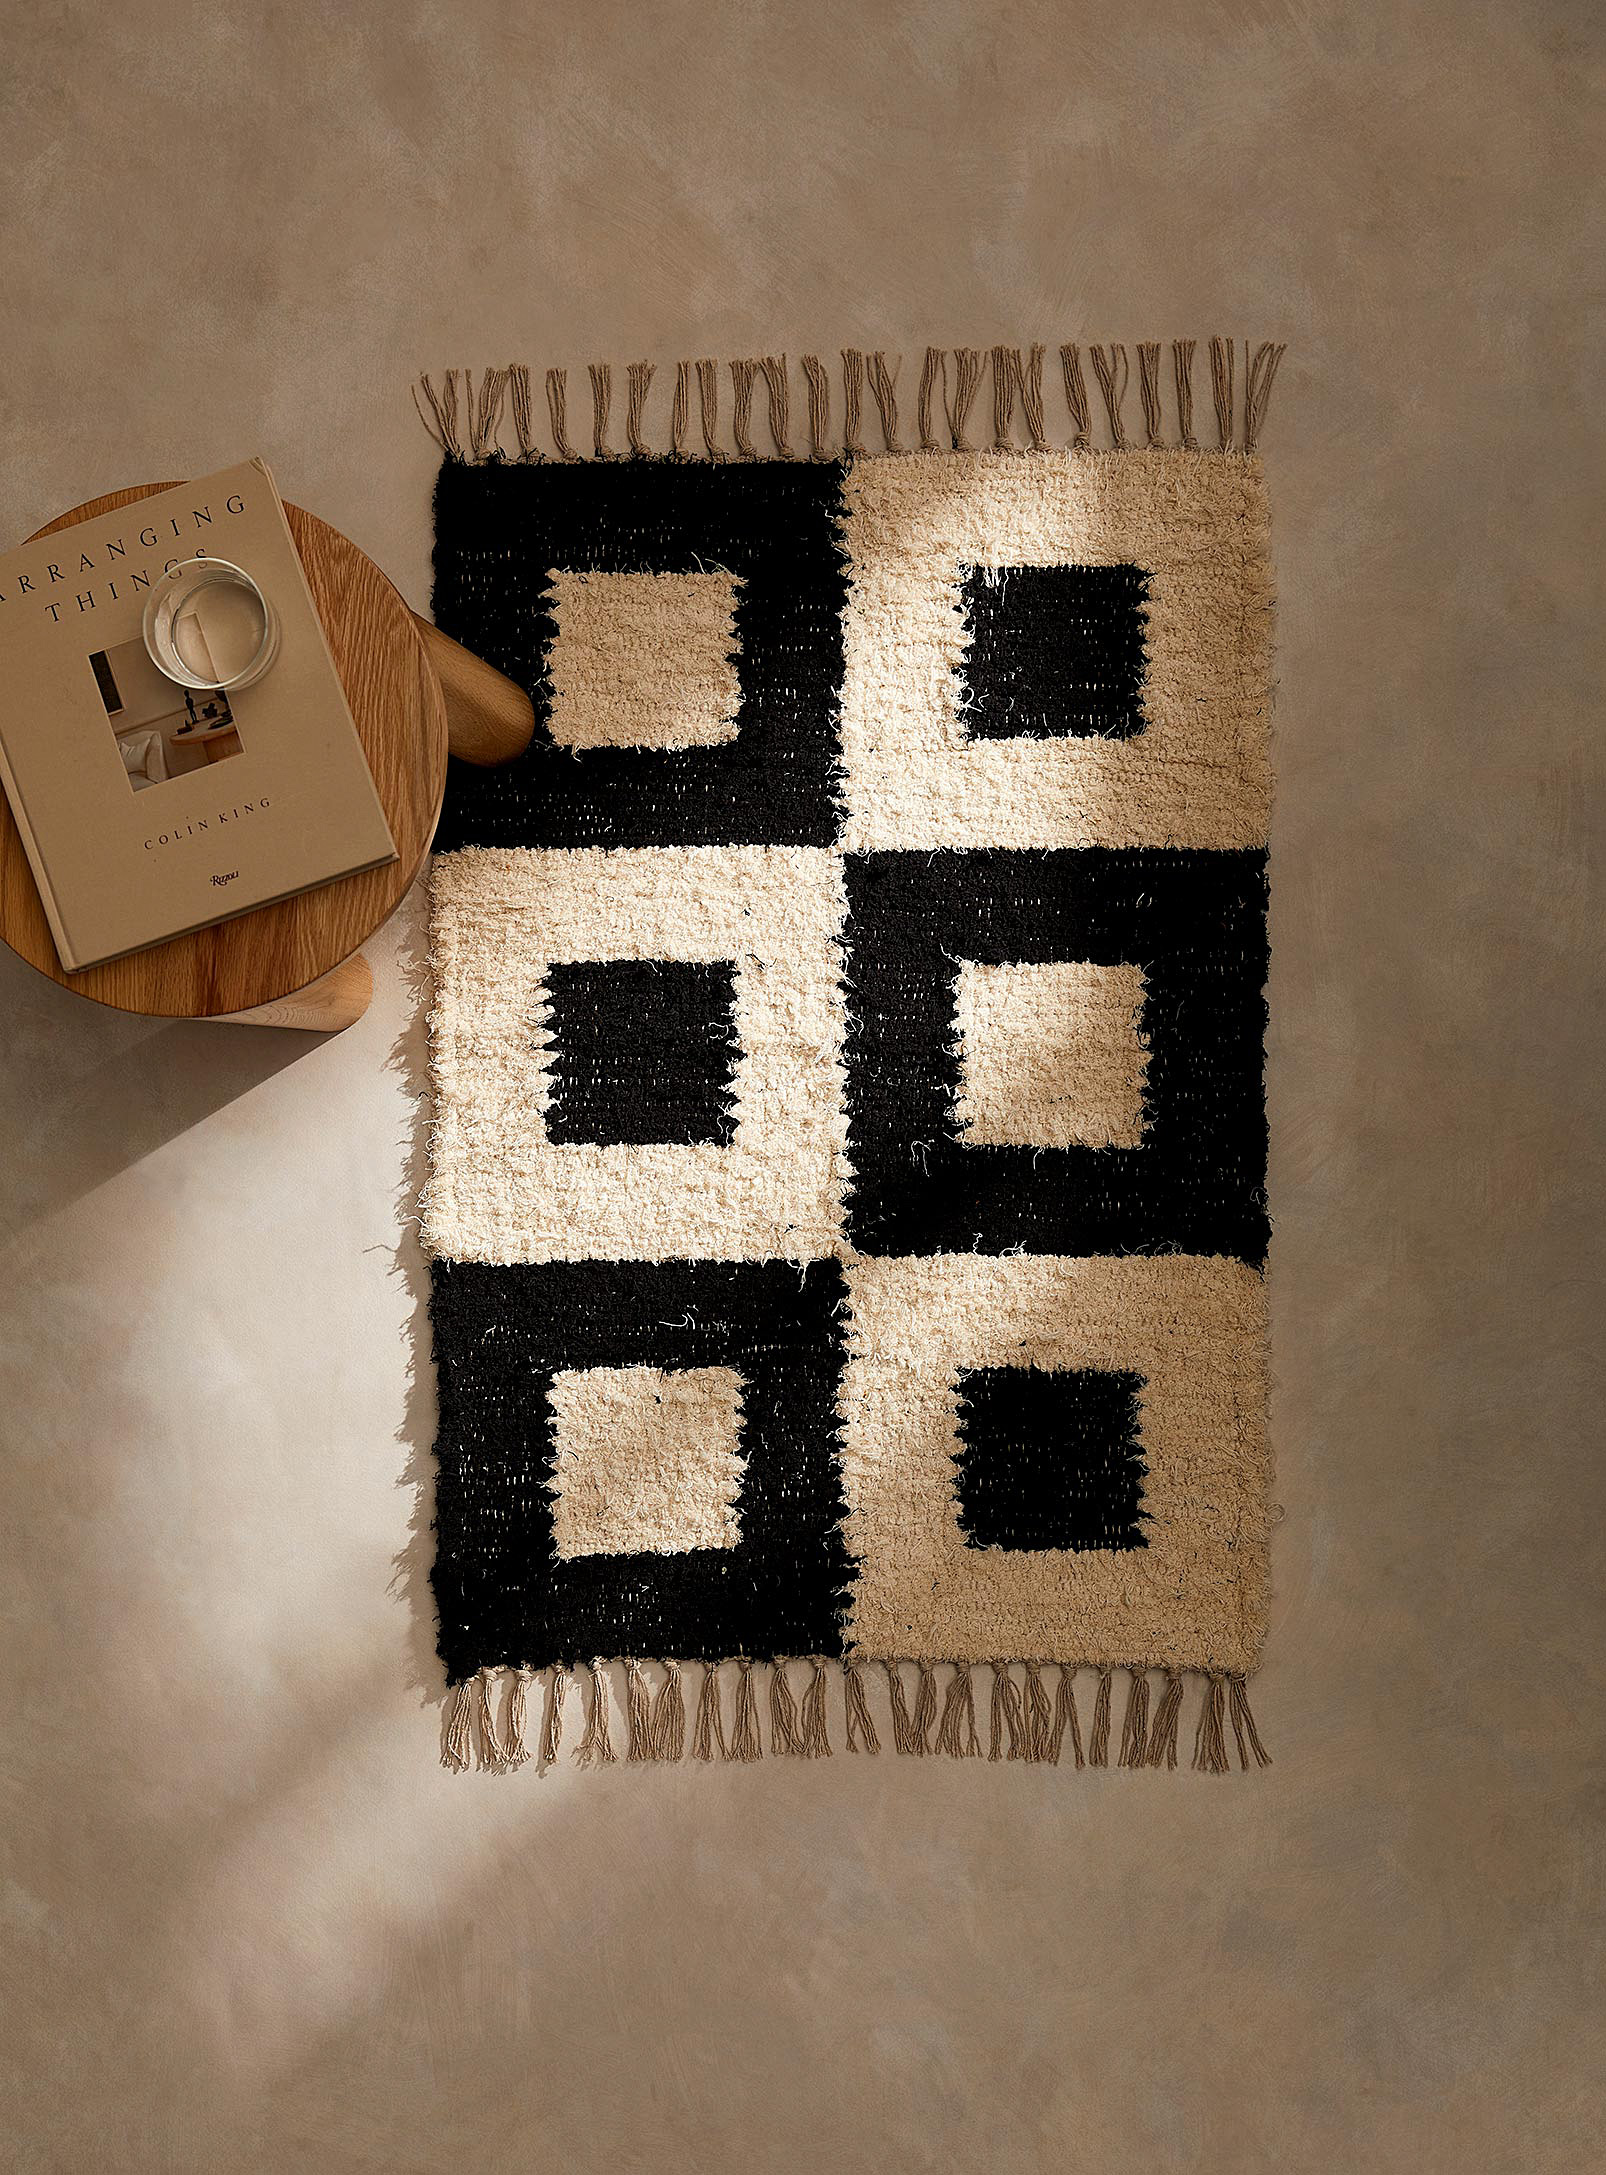 Simons Maison Small Plush Monochrome Artisanal Rug See Available Sizes In Black And White